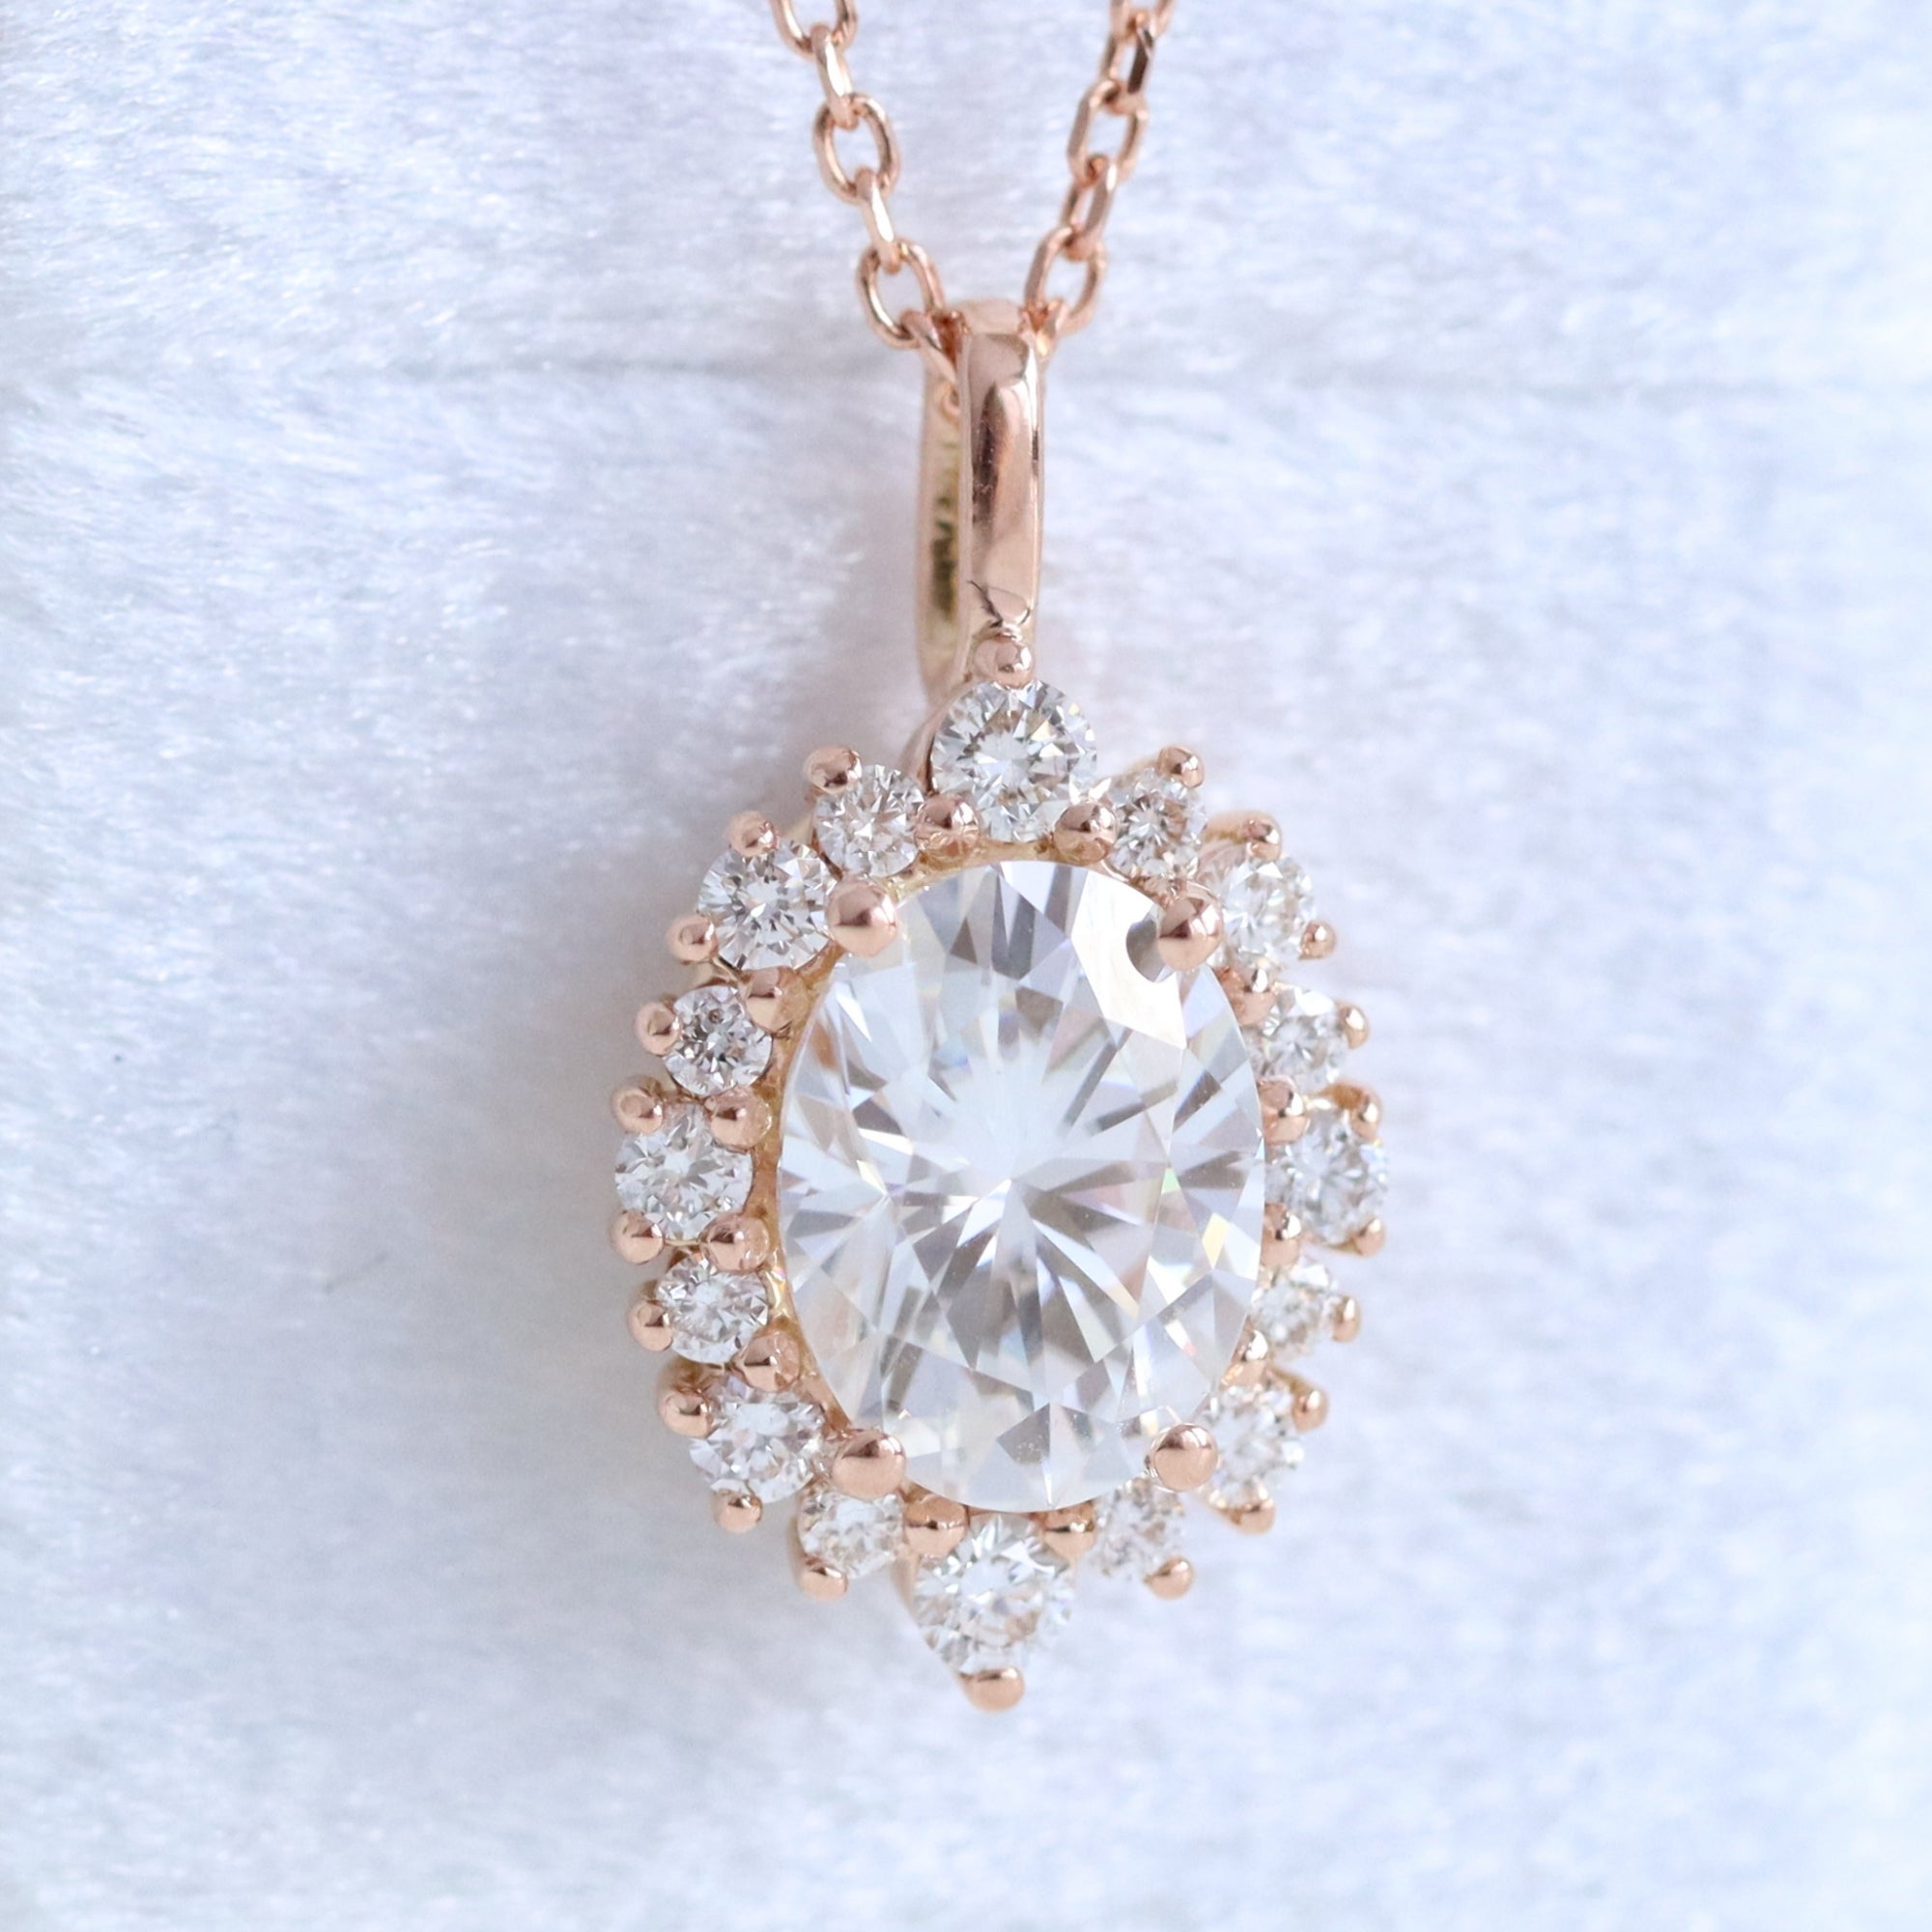 Tiara Diamond Pendant Rose Gold V Shaped Layering Necklaces Drop Charm 14K Yellow Gold - Made to Order